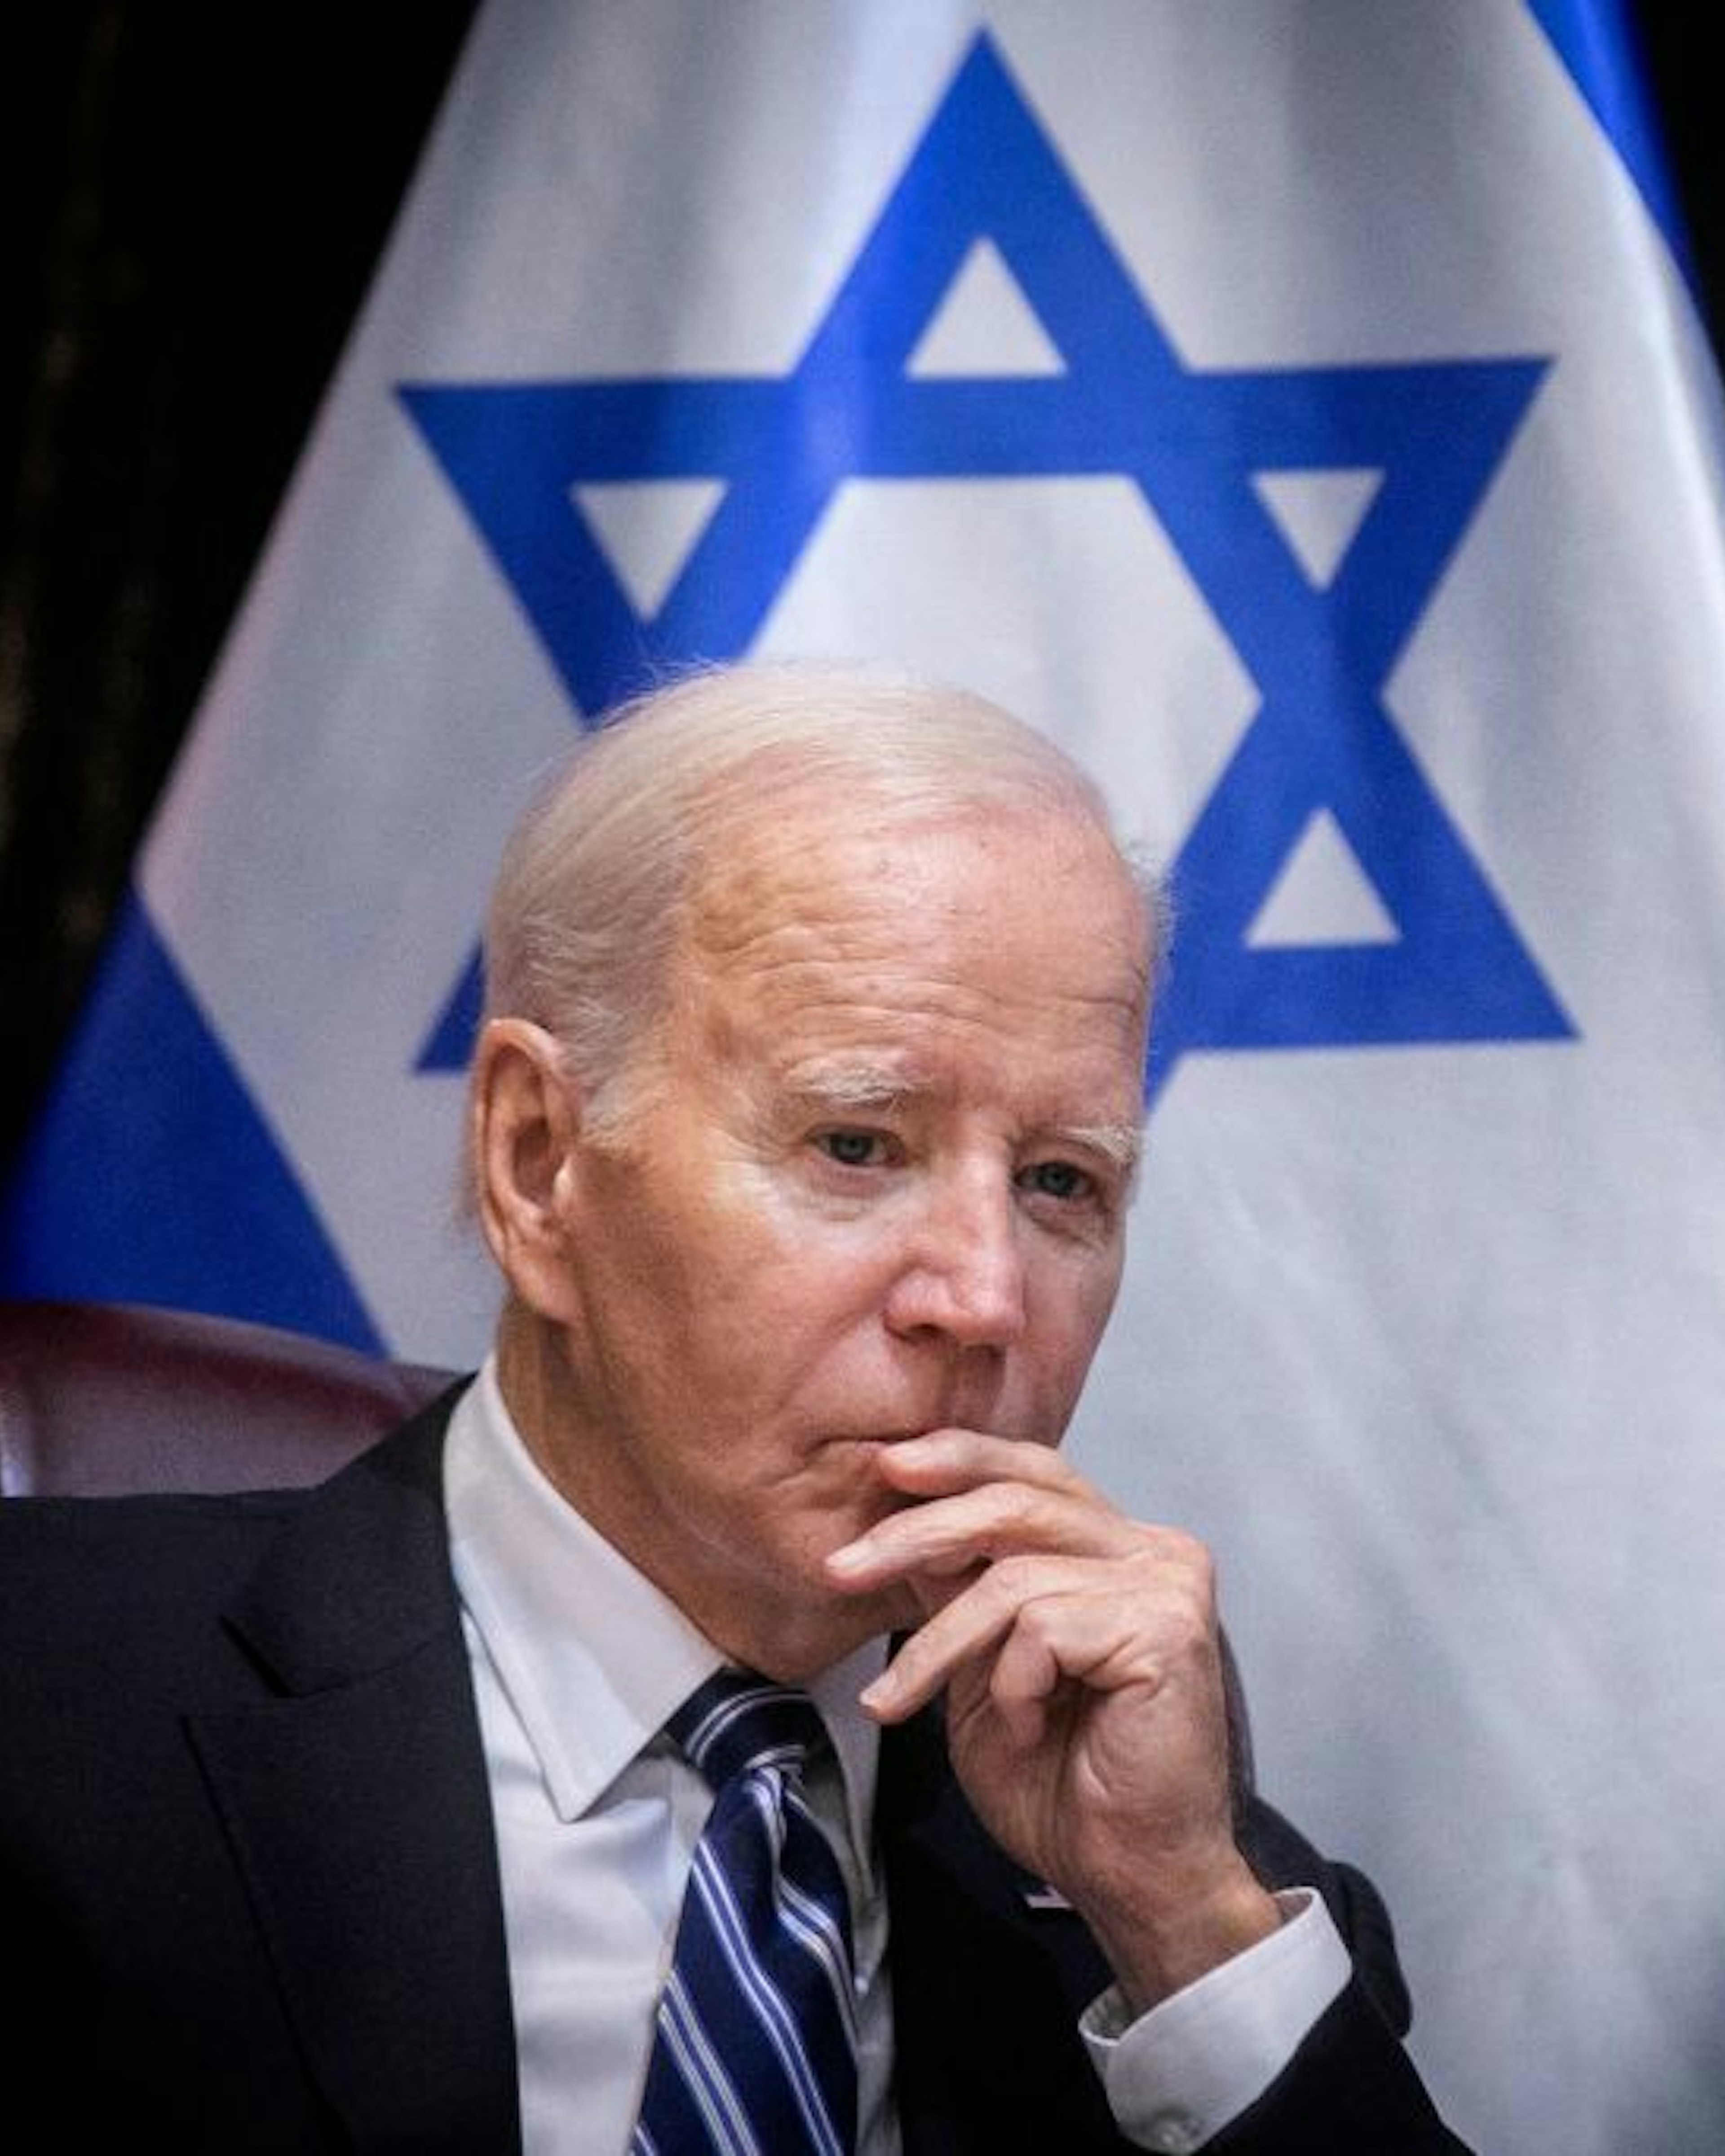 TOPSHOT - US President Joe Biden joins Israel's Prime Minister for the start of the Israeli war cabinet meeting, in Tel Aviv on October 18, 2023, amid the ongoing battles between Israel and the Palestinian group Hamas. US President Joe Biden landed in Tel Aviv on October 18, 2023 as Middle East anger flared after hundreds were killed when a rocket struck a hospital in war-torn Gaza, with Israel and the Palestinians quick to trade blame. (Photo by Miriam Alster / POOL / AFP) (Photo by MIRIAM ALSTER/POOL/AFP via Getty Images)